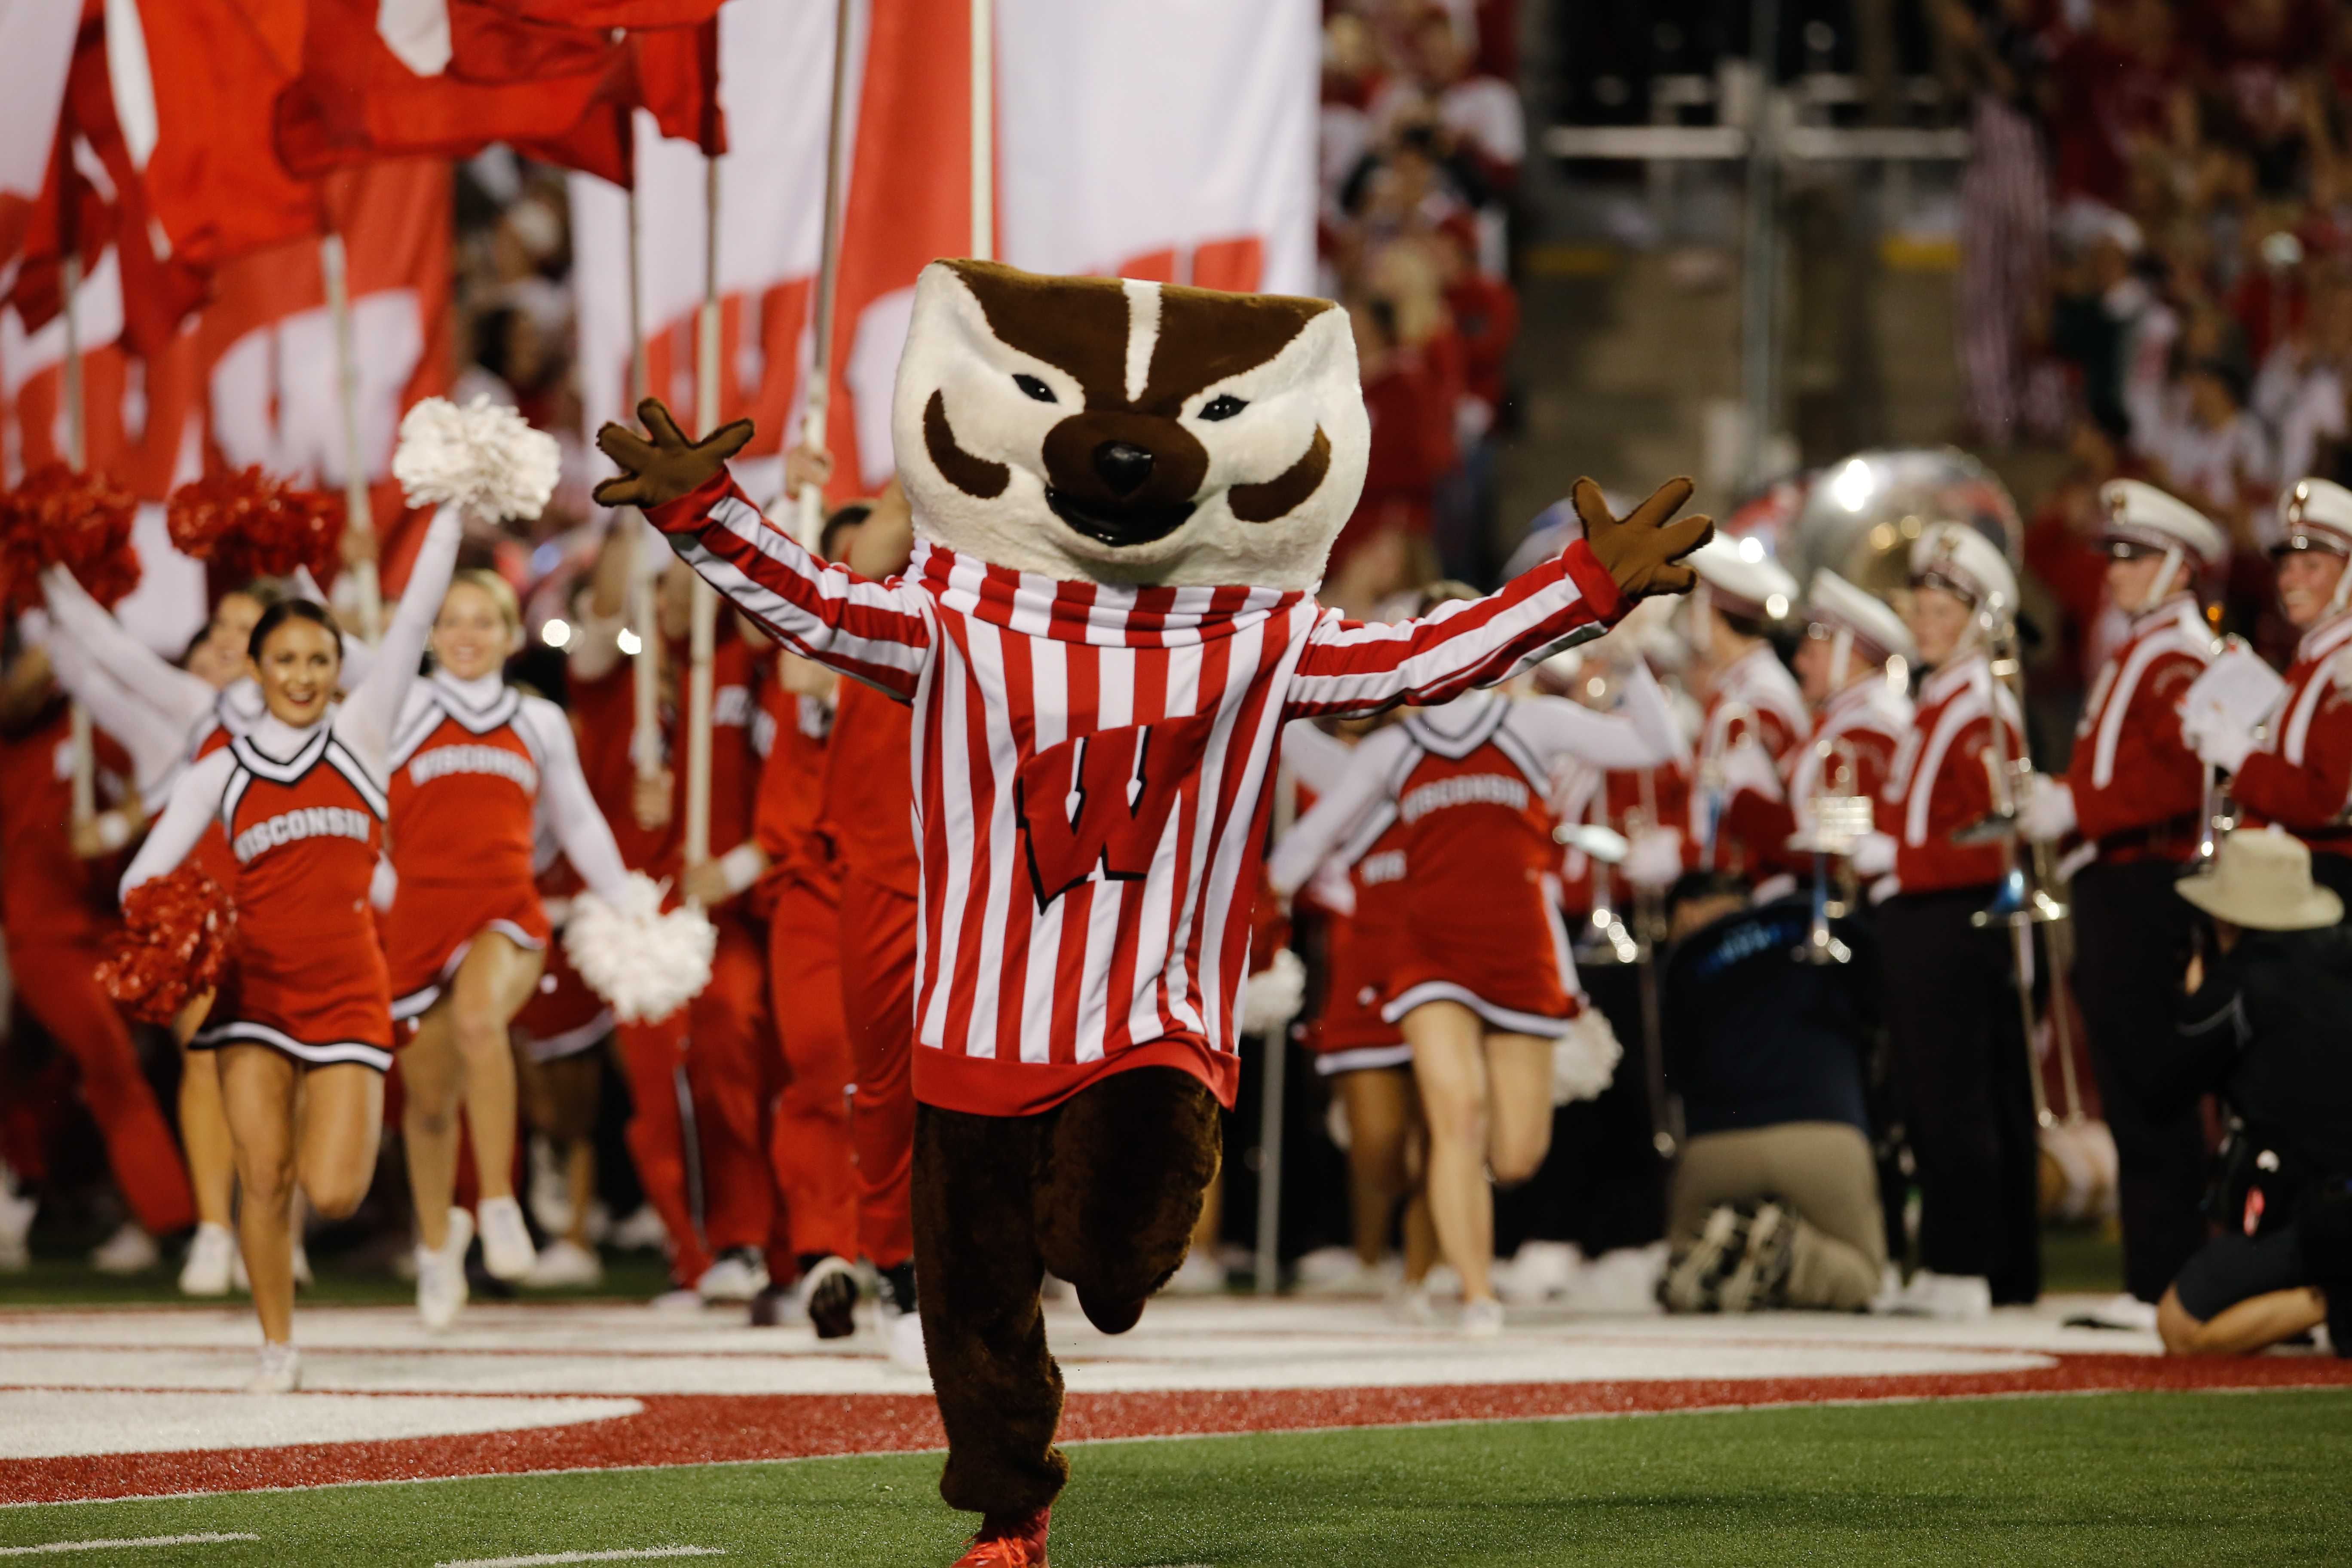 Wisconsin's beloved mascot returns to the streets of Madison in a